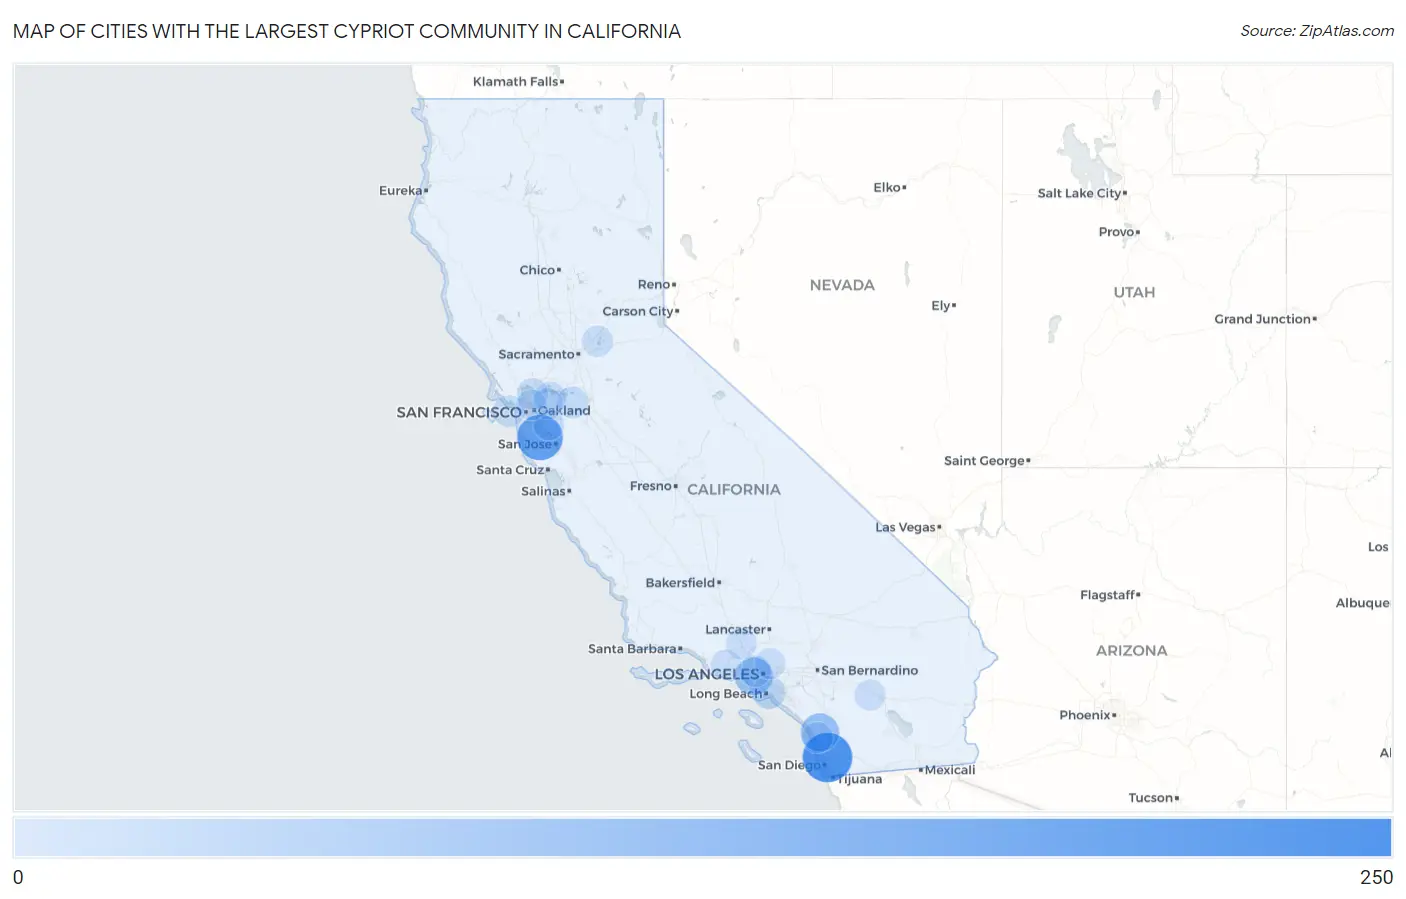 Cities with the Largest Cypriot Community in California Map